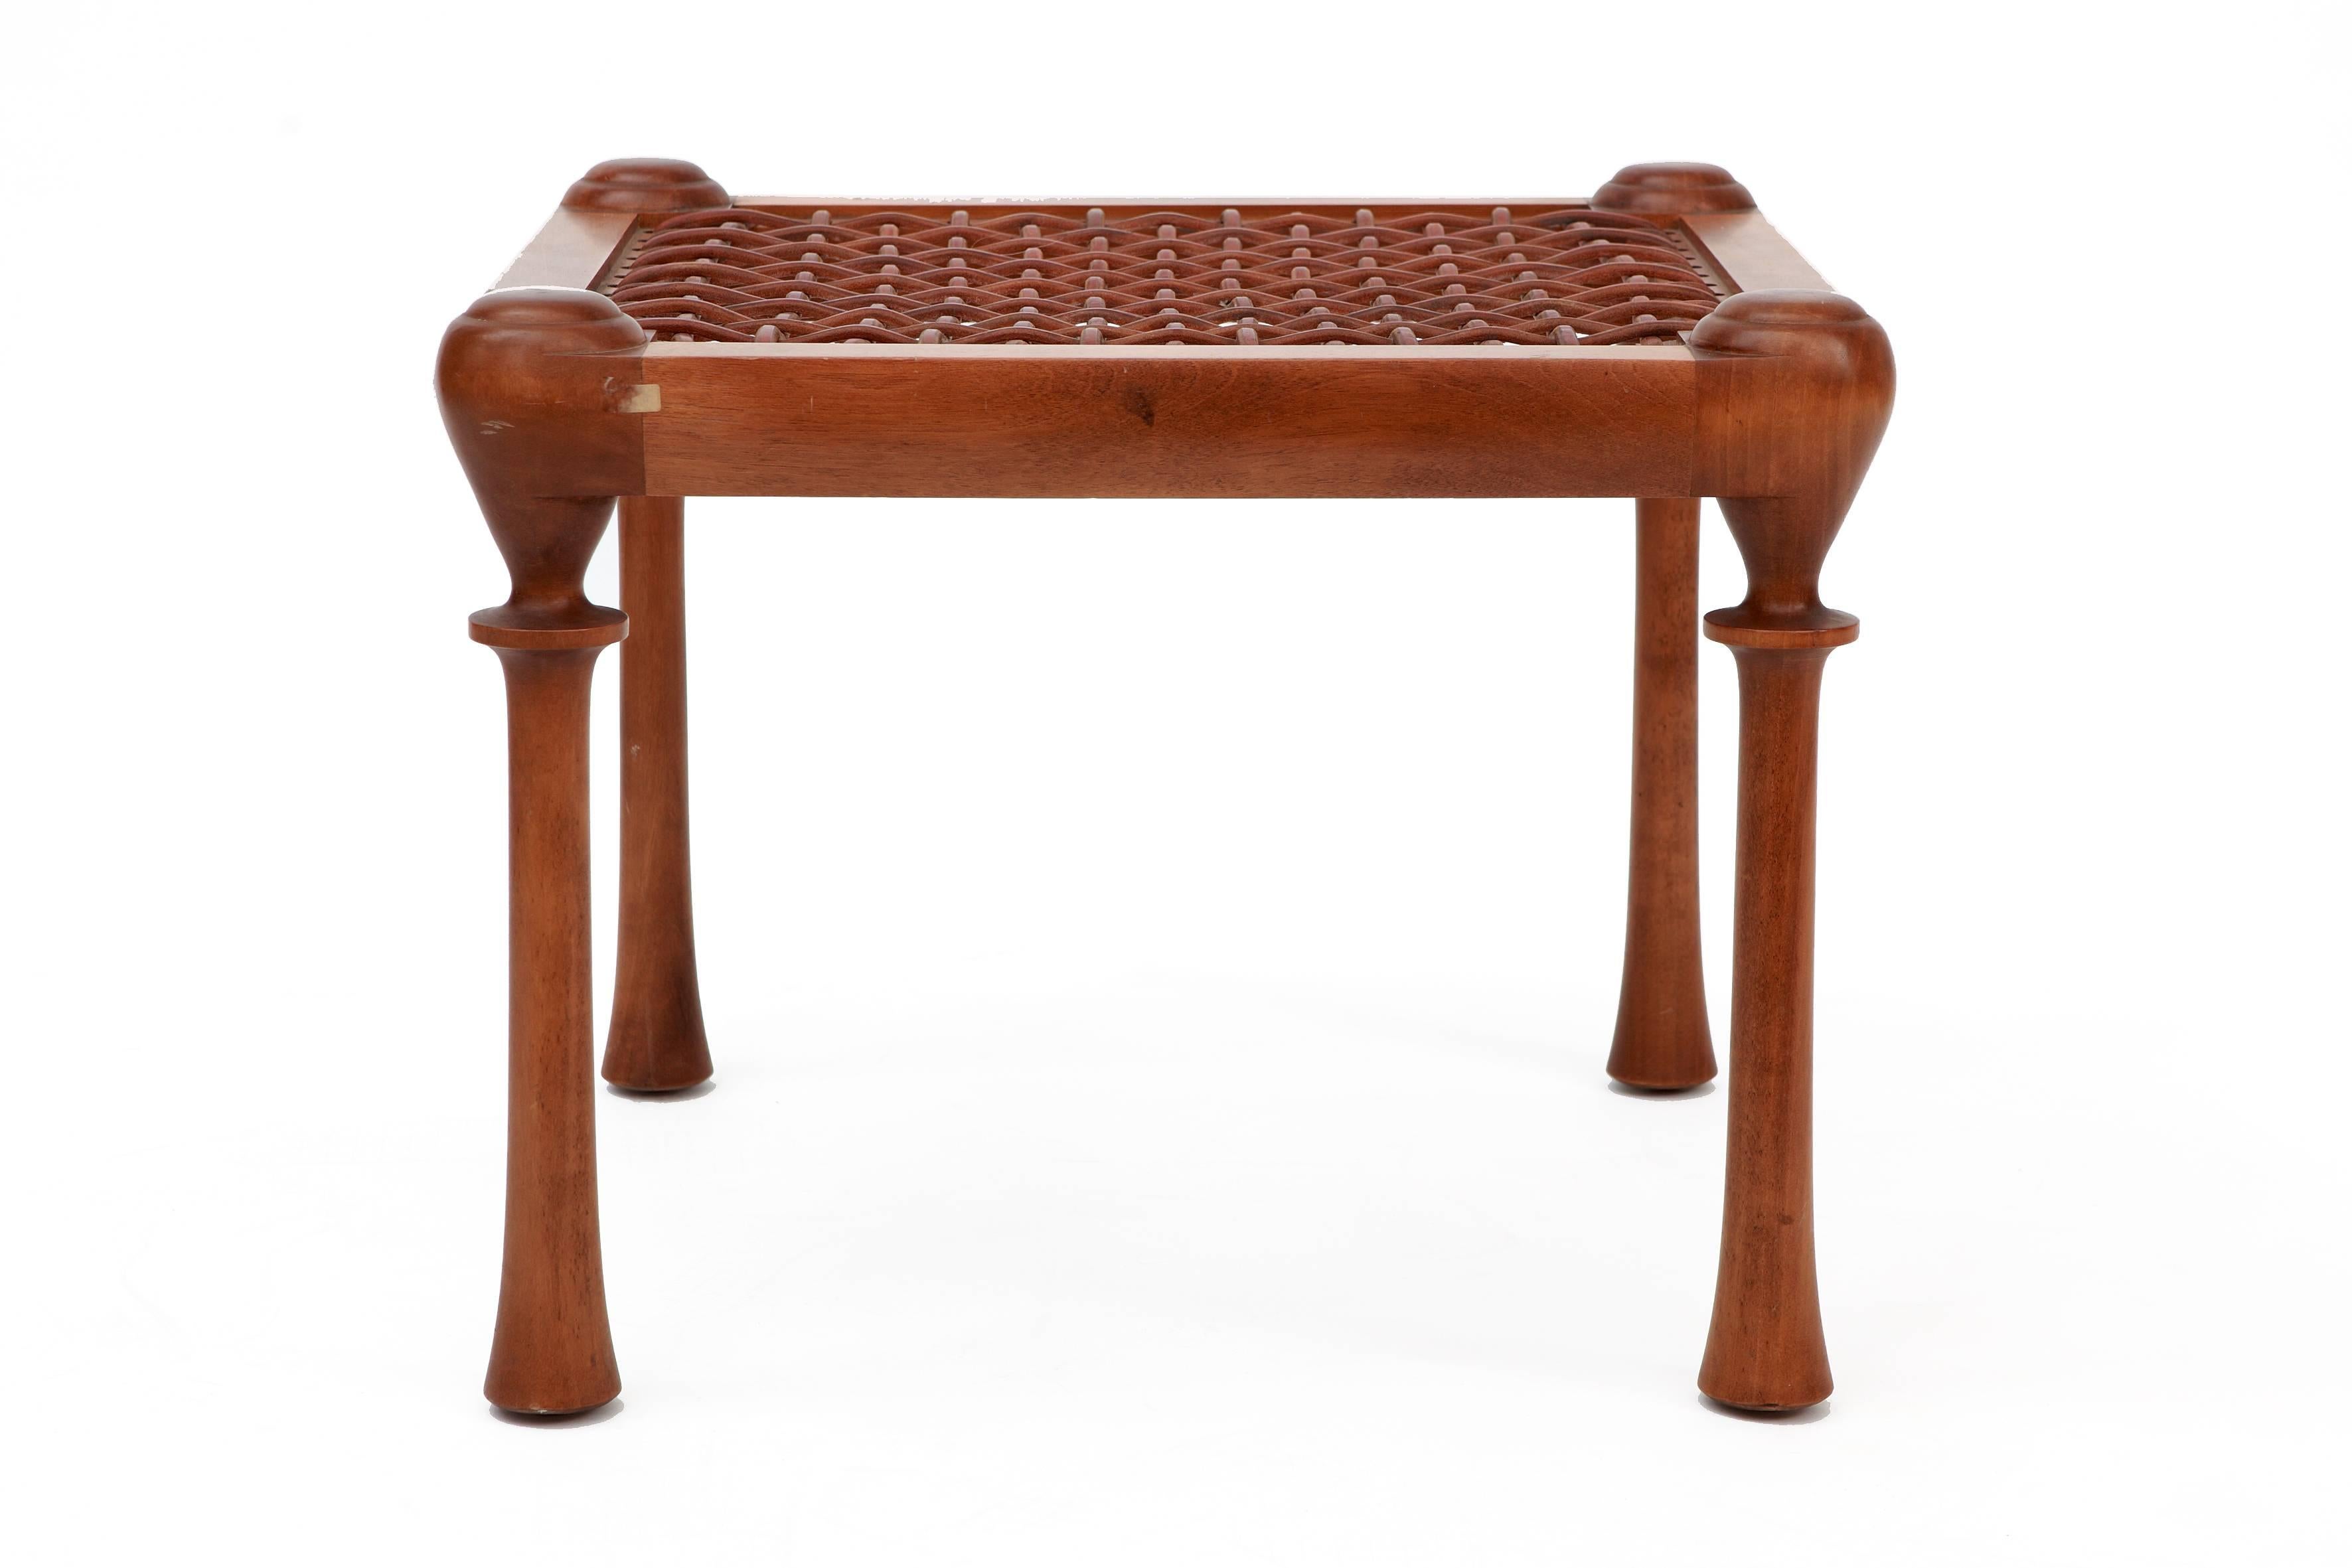 Other Four-Legged Walnut Stool with Interlaced Leather Straps Inside the Frame For Sale